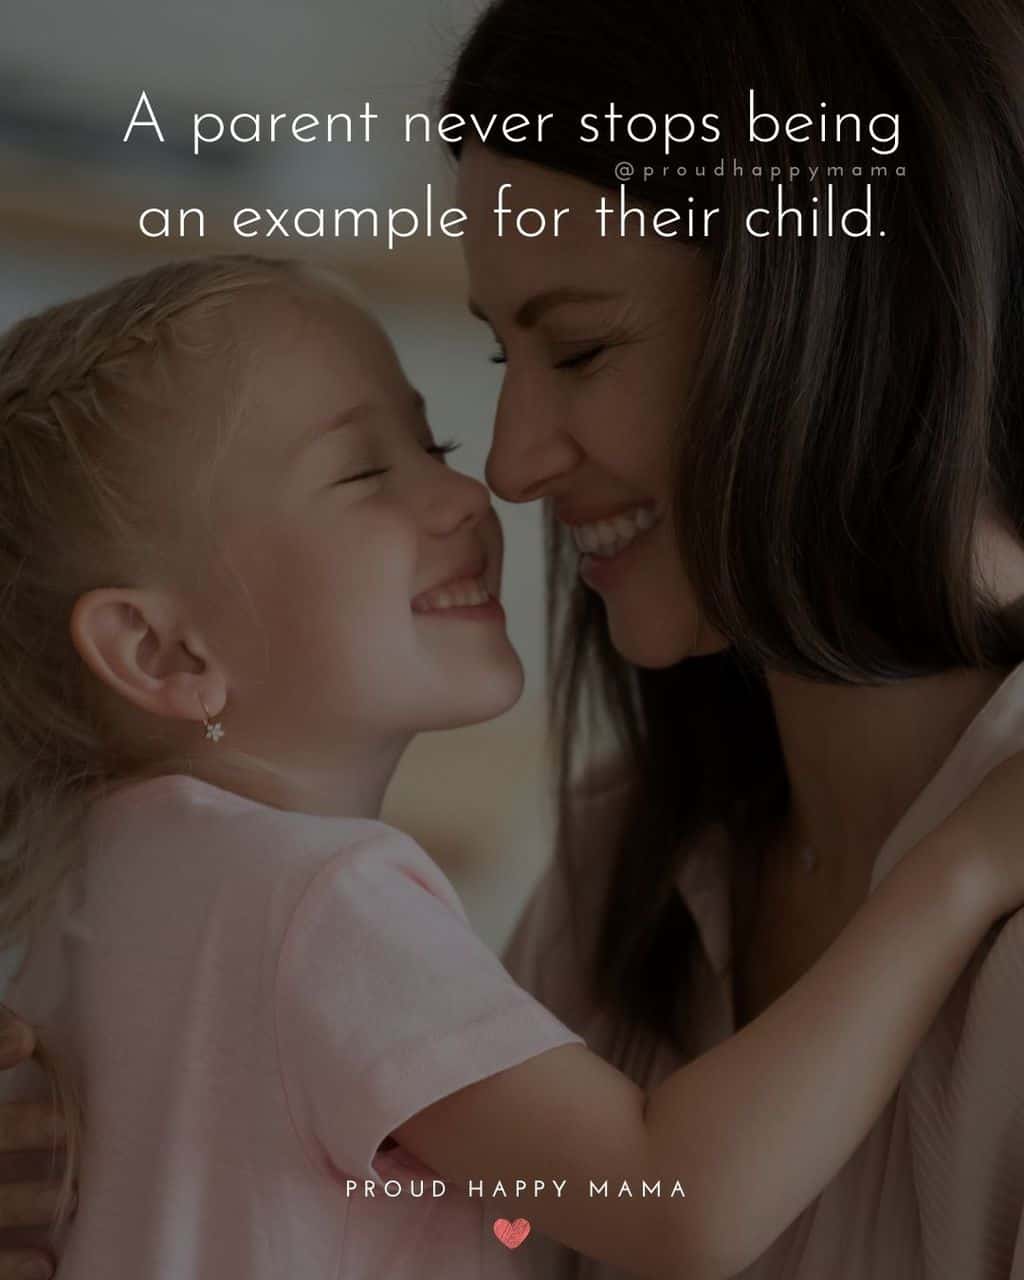 Parenting Quotes - A parent never stops being an example for their child.’